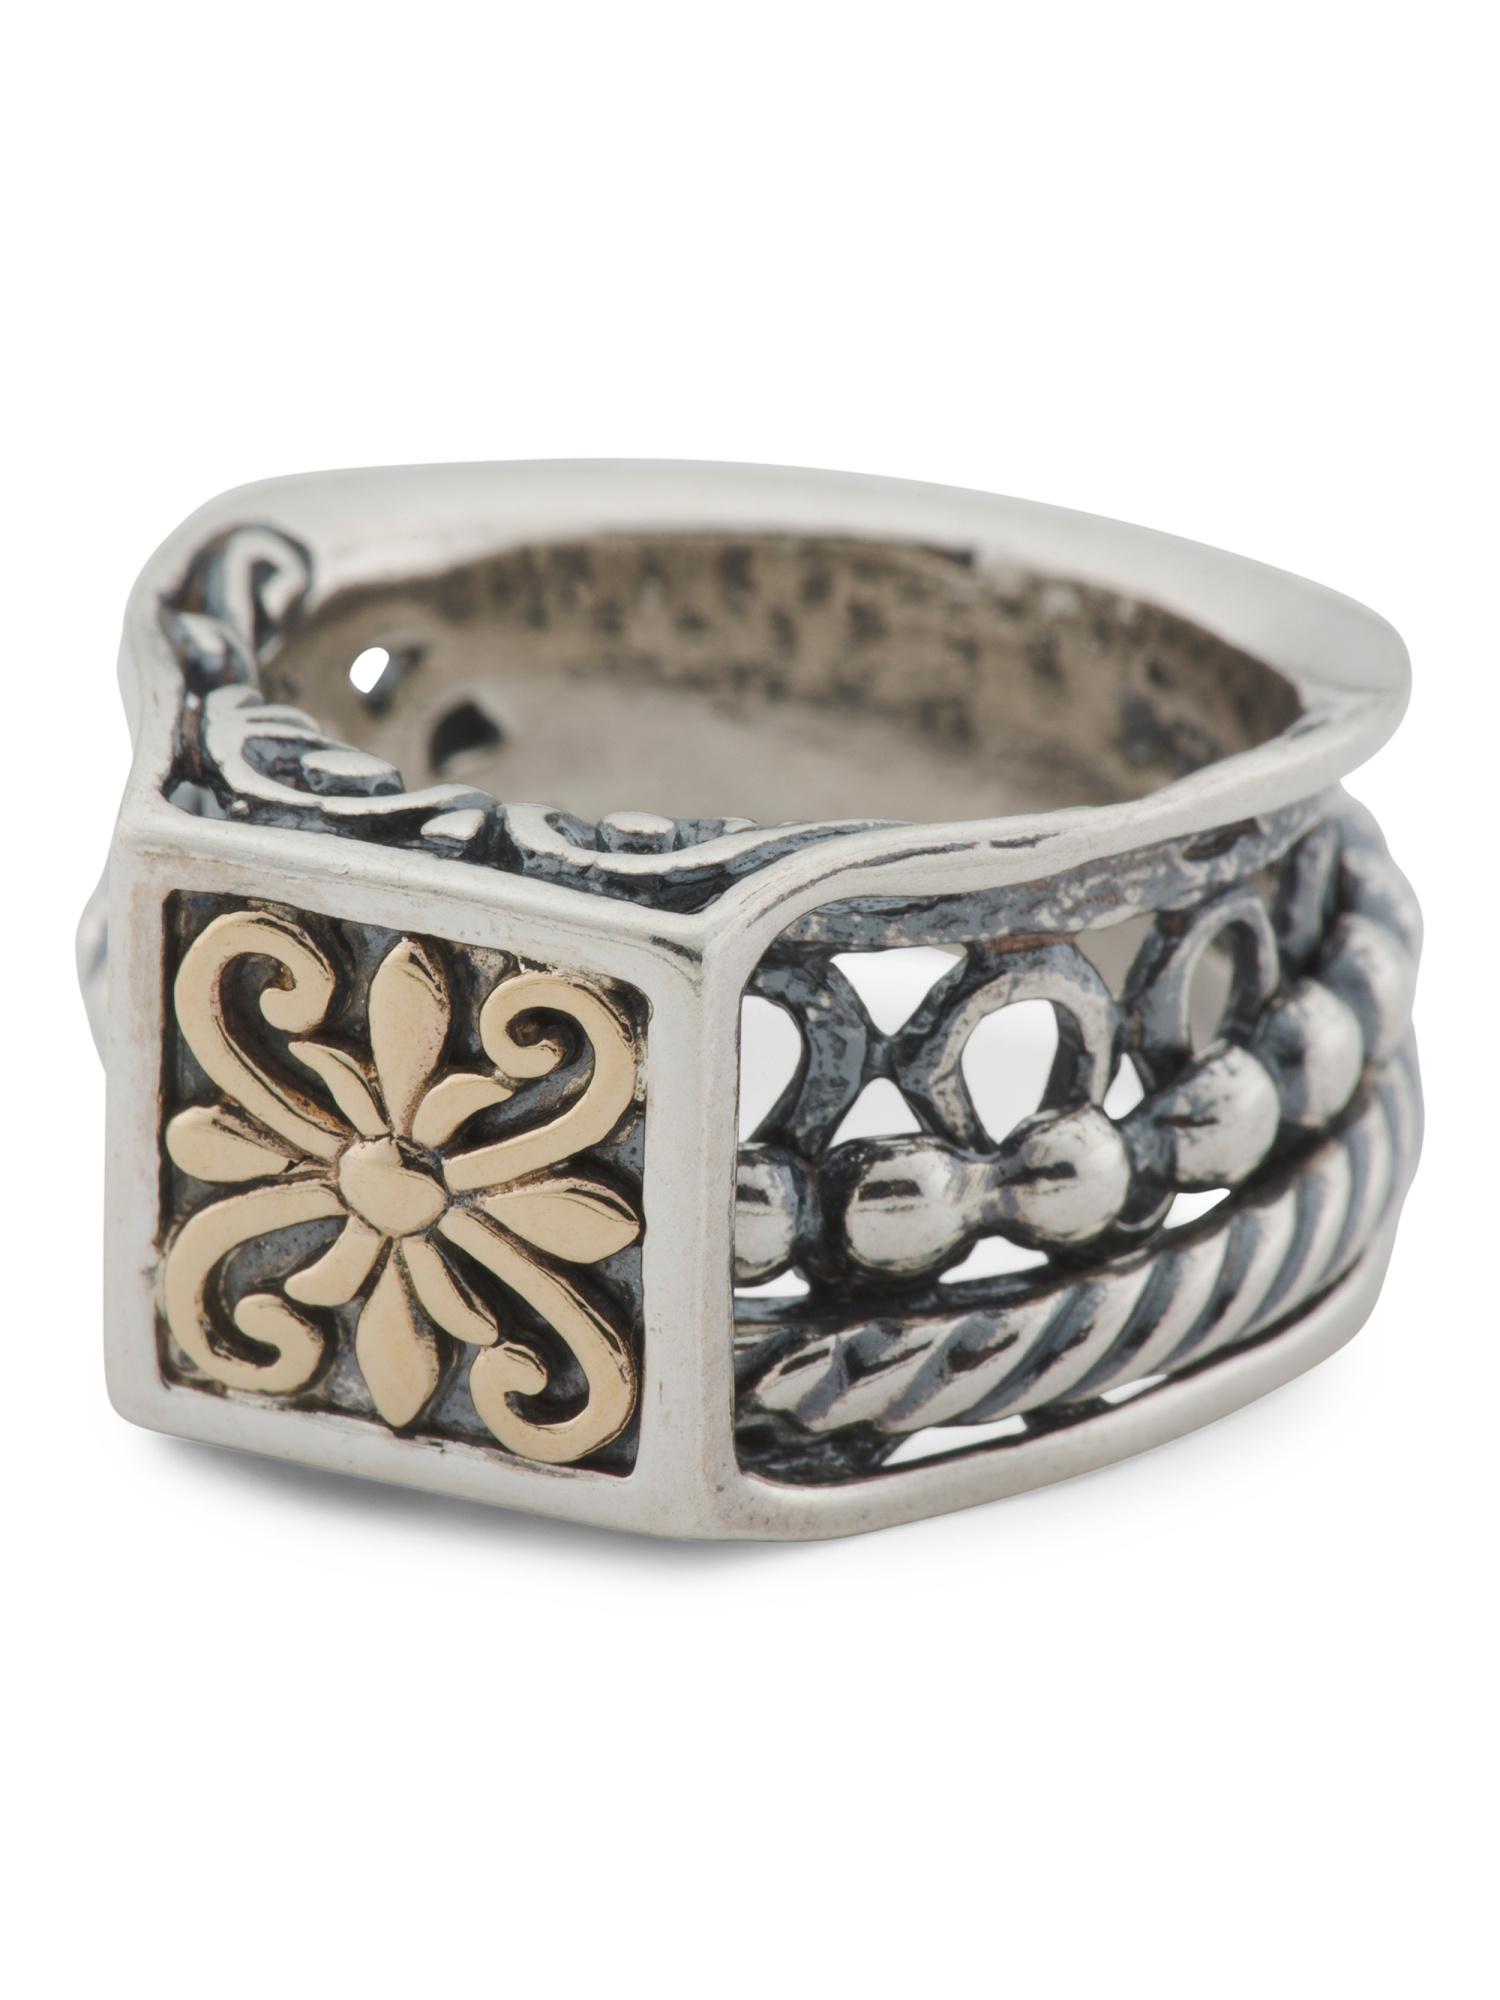 Tj Maxx Made In Israel 14k And Sterling Silver Scroll Design Ring in